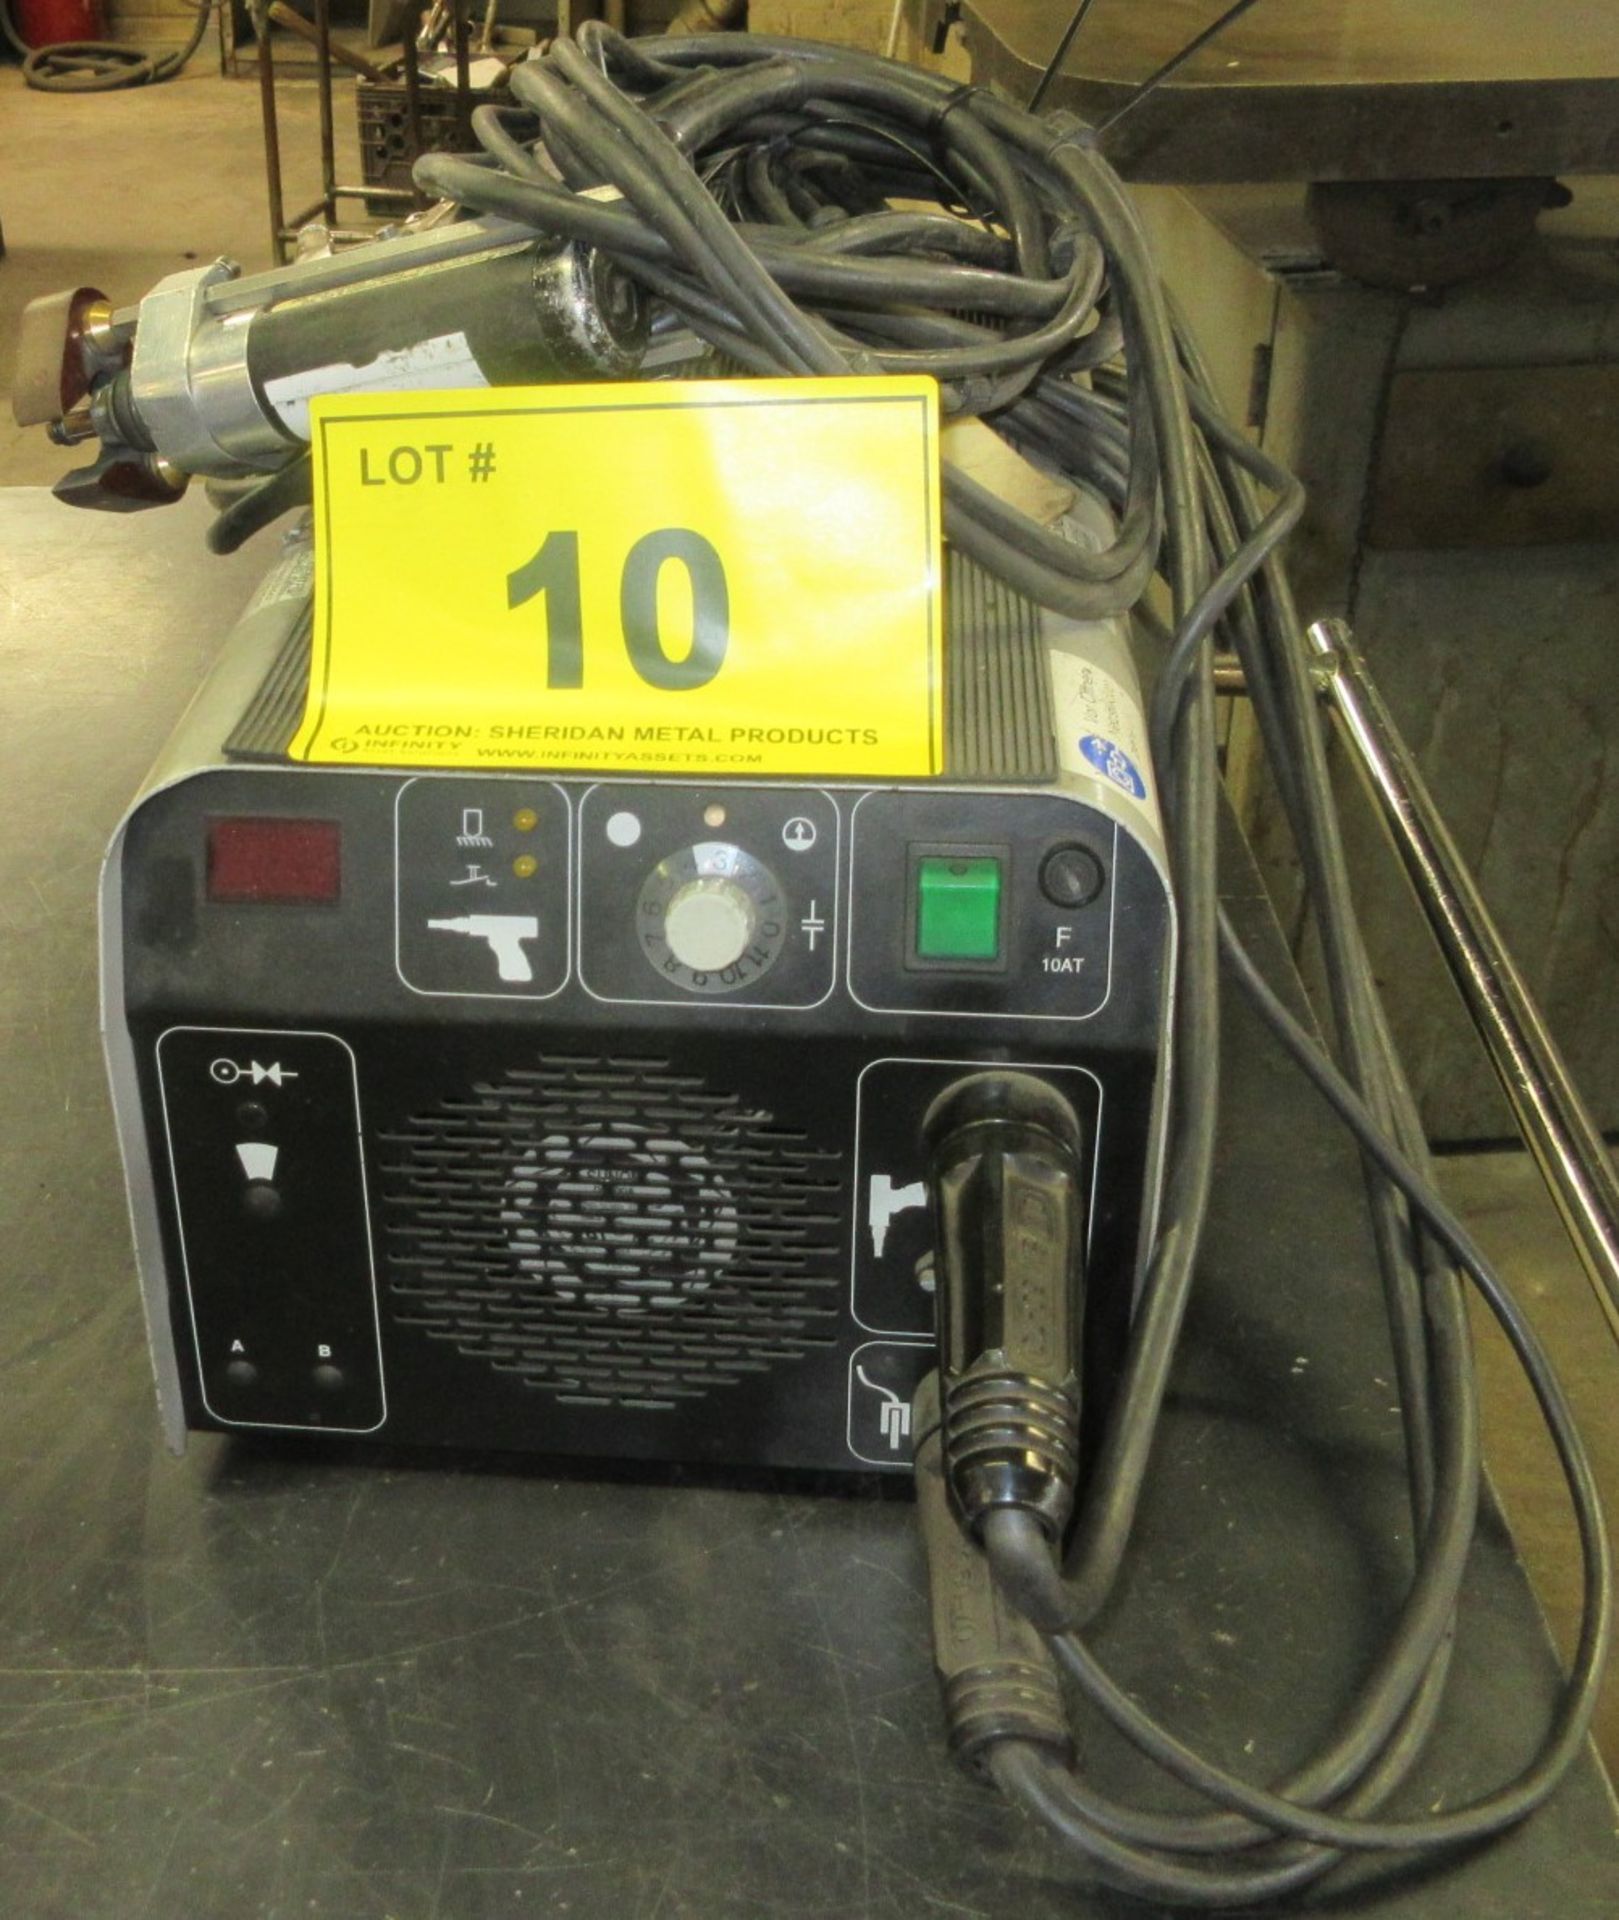 HBS / KES 2100 STUD WELDER W/ CABLES AND PMH10 GUN - Image 2 of 2